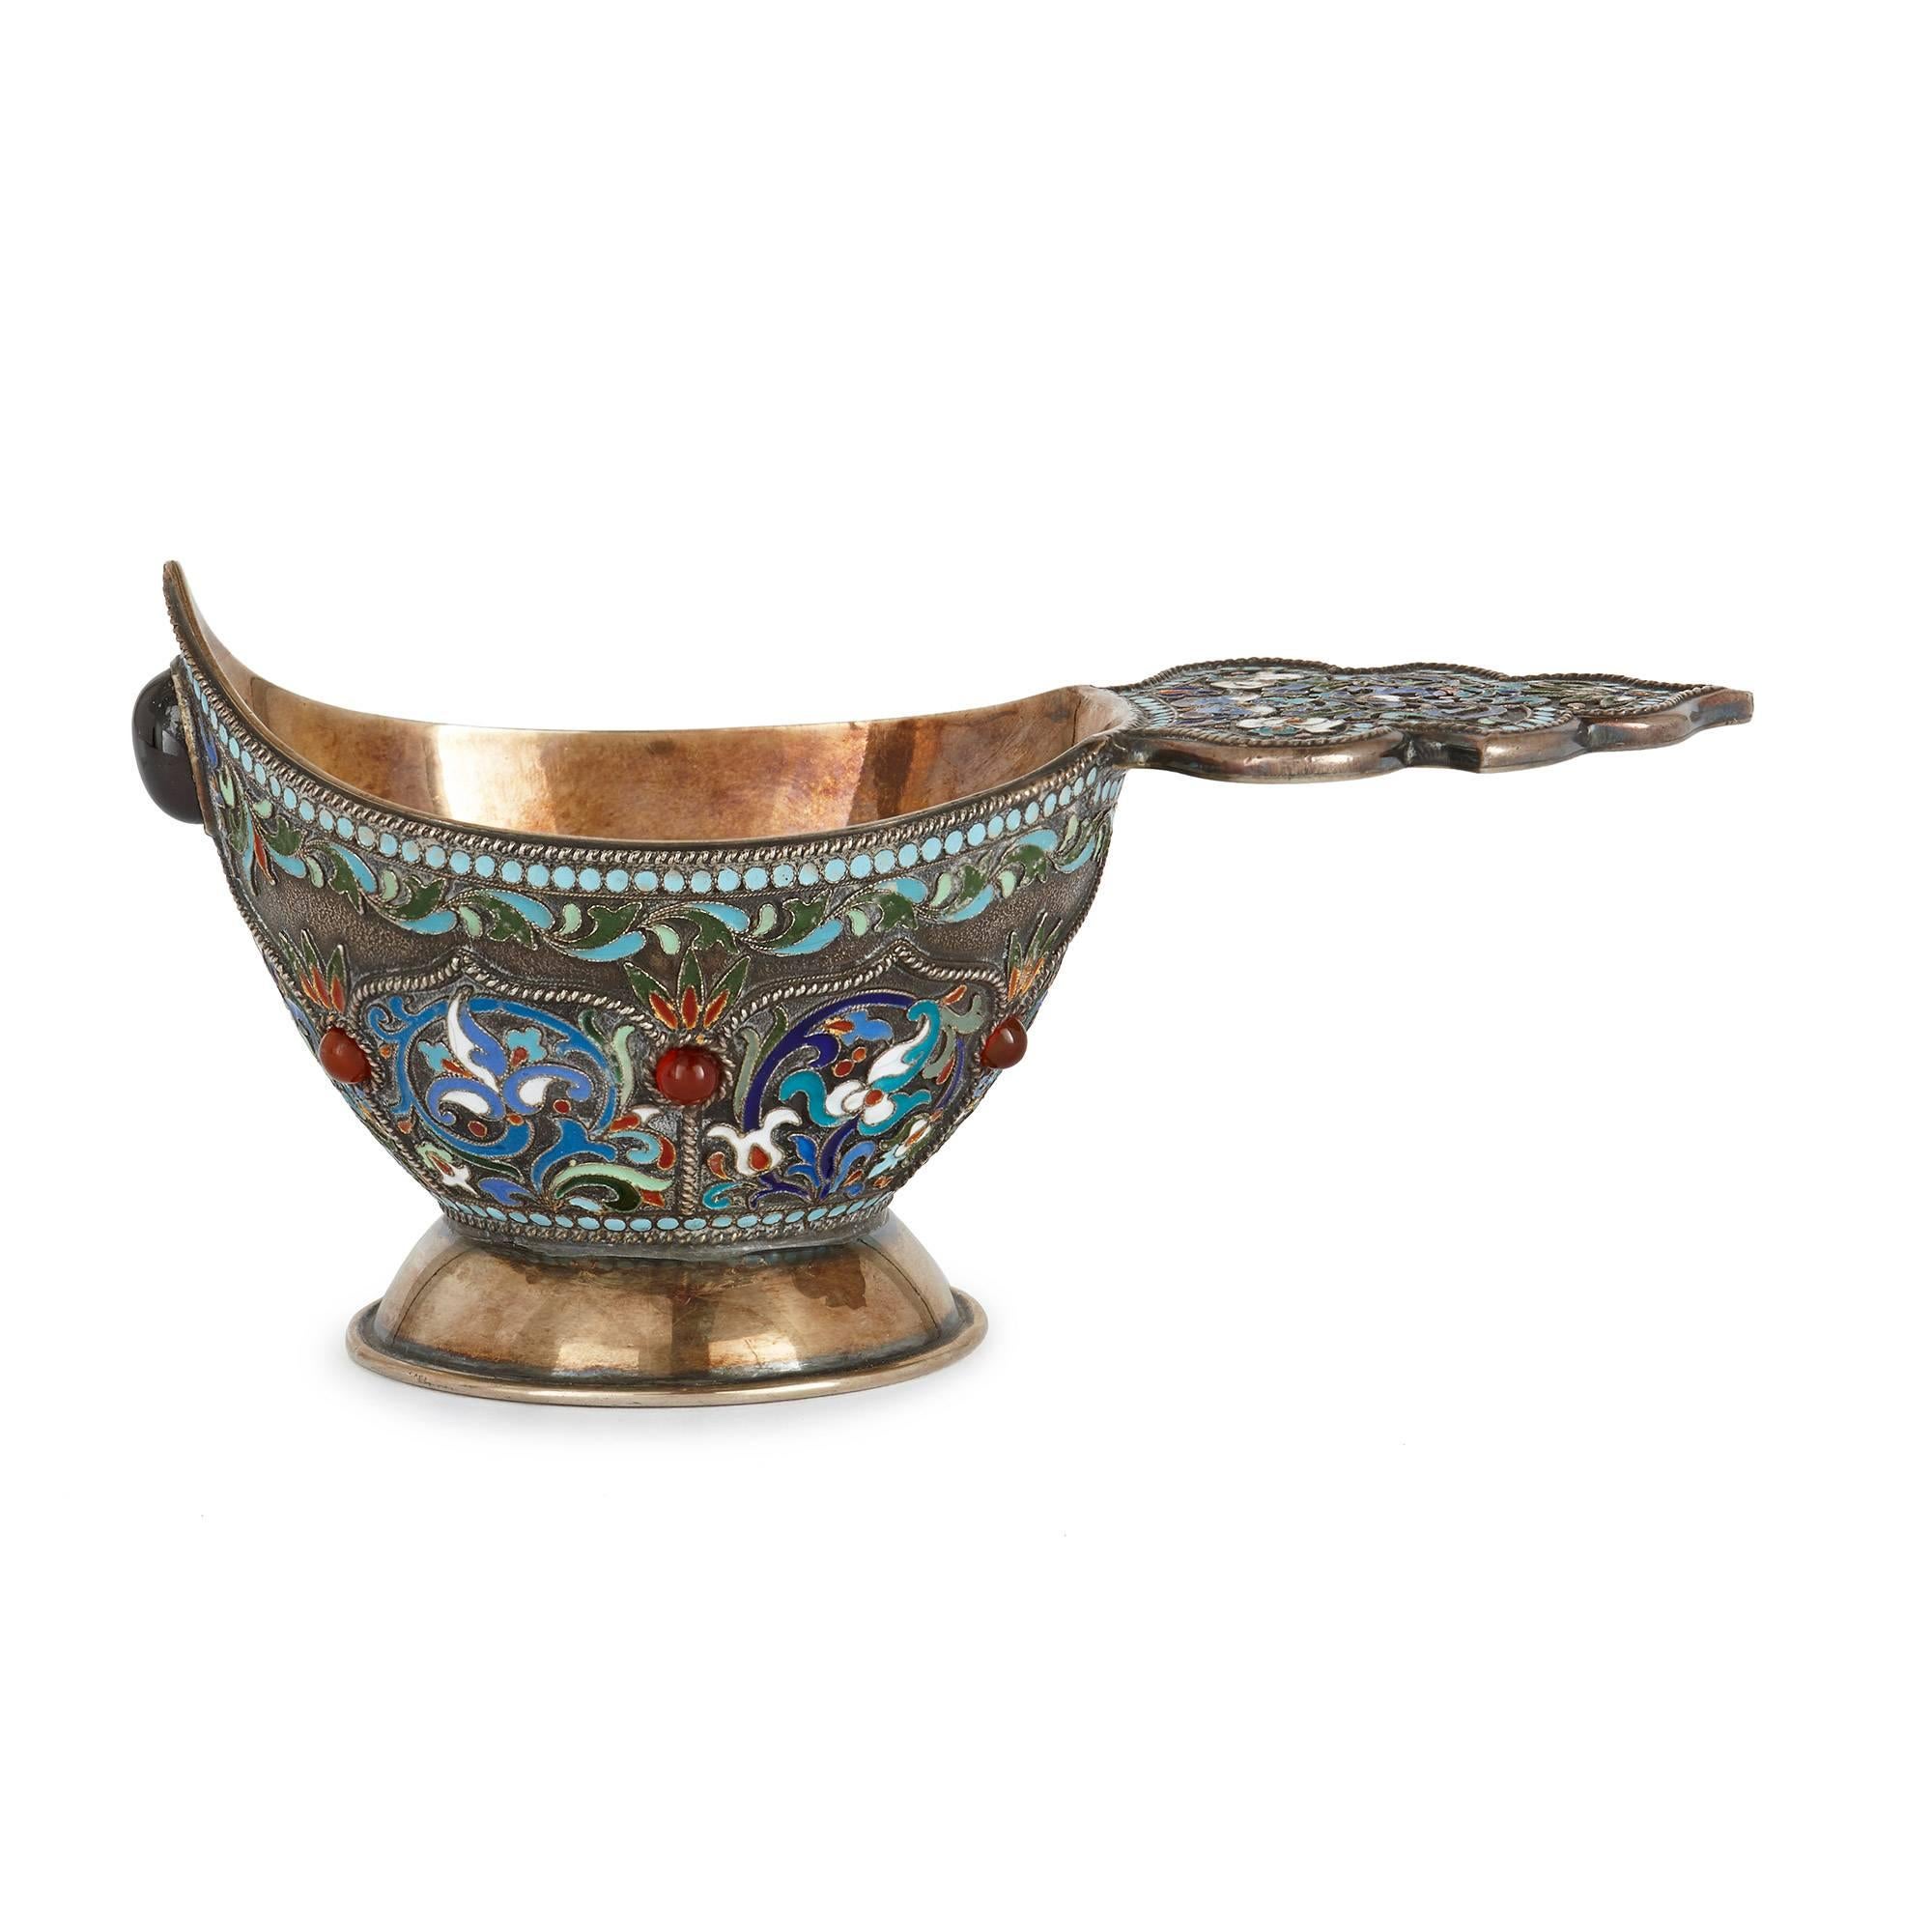 The silver gilt kovsch decorated in cloisonné enamel with a pattern of leaves and flowers, set with polished gemstones, marks to the underside.

The kovsch is a traditional Russian drinking vessel, featuring a boat shaped bowl and handle, that